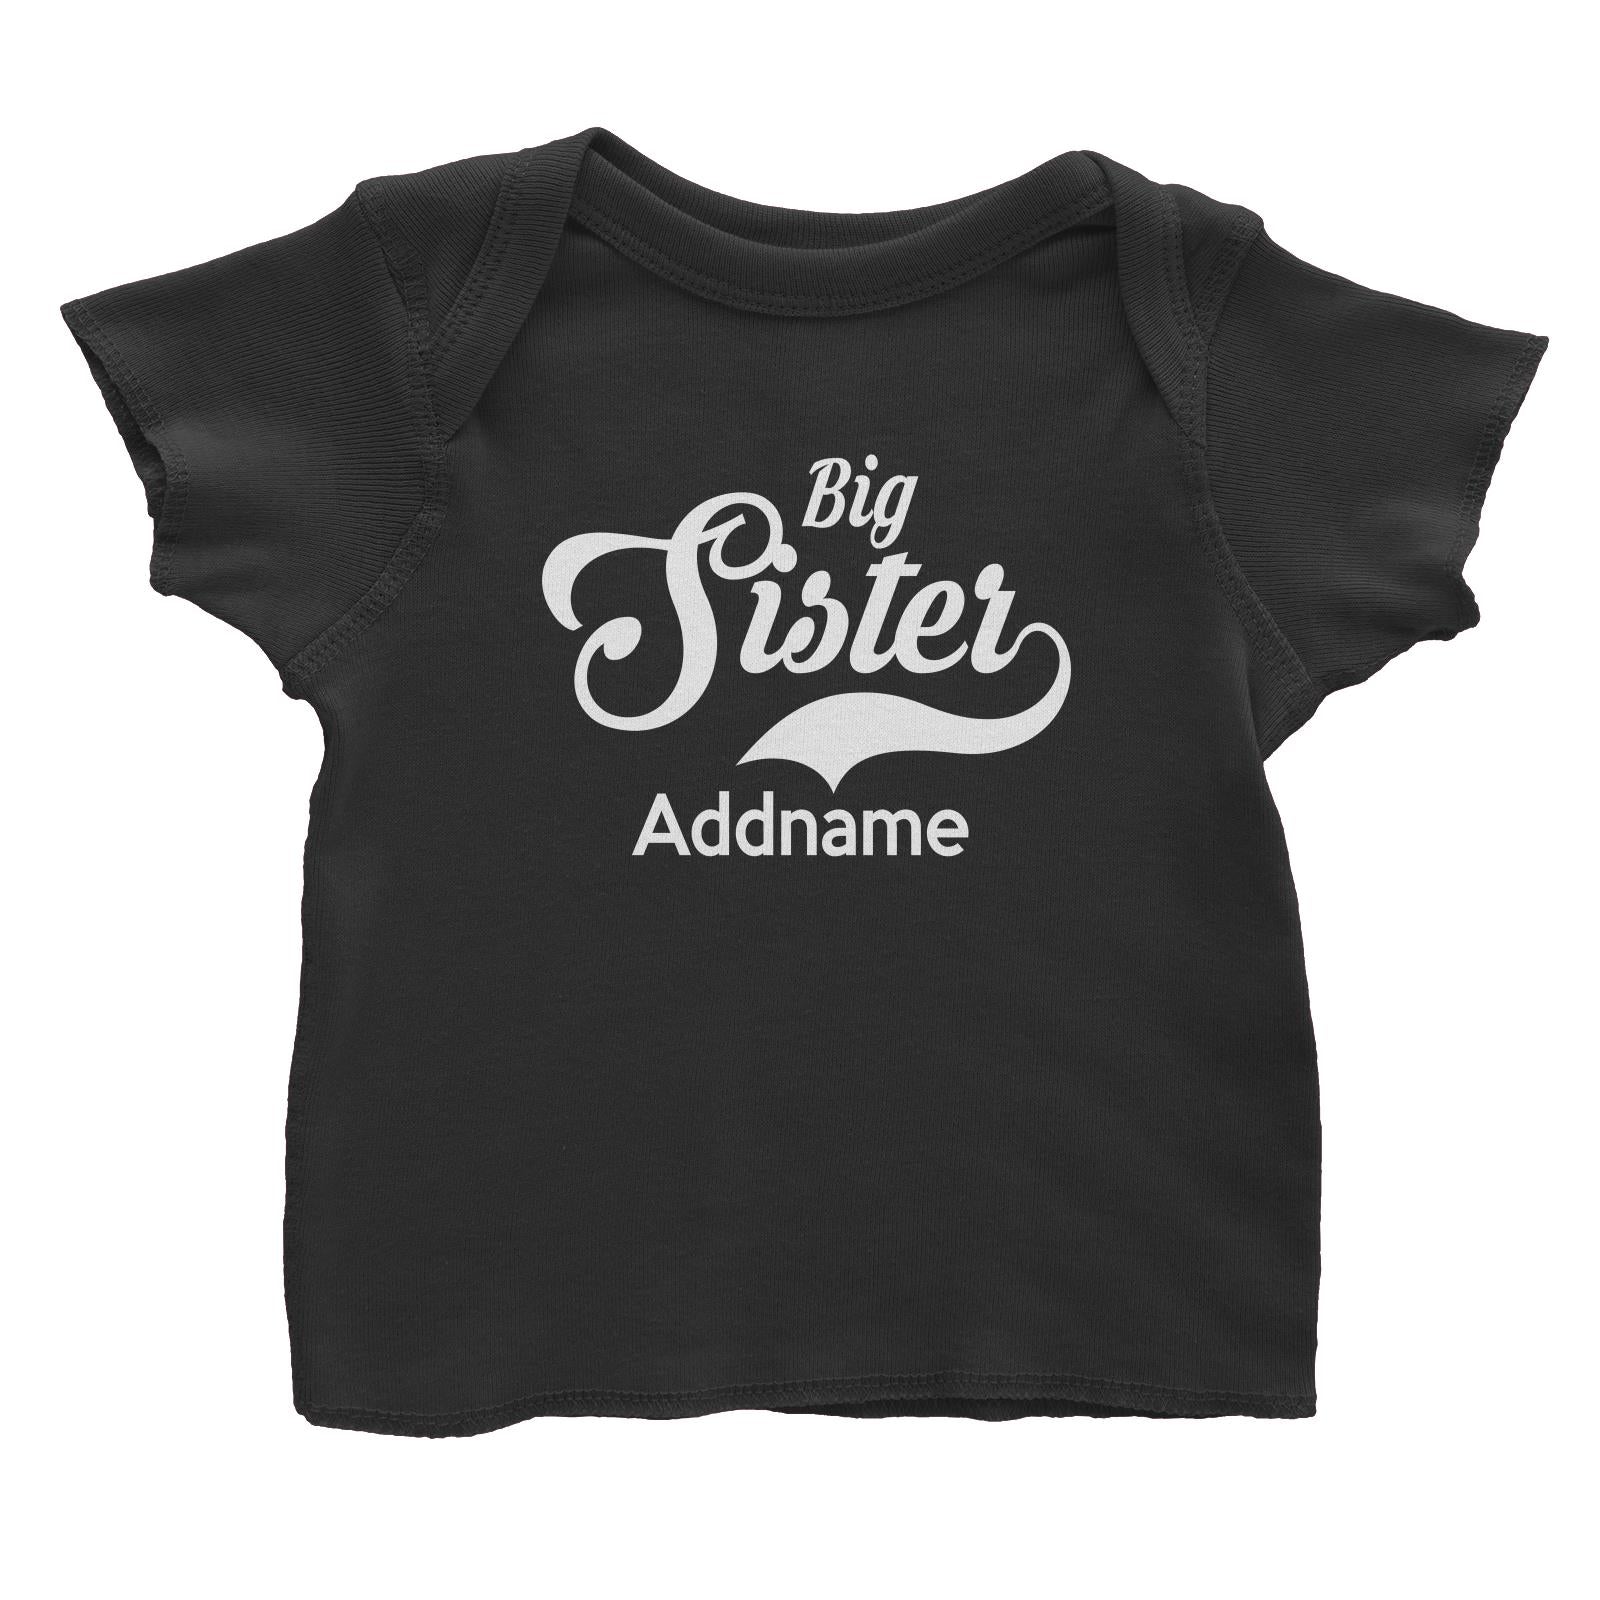 Retro Big Sister Addname Baby T-Shirt  Matching Family Personalizable Designs